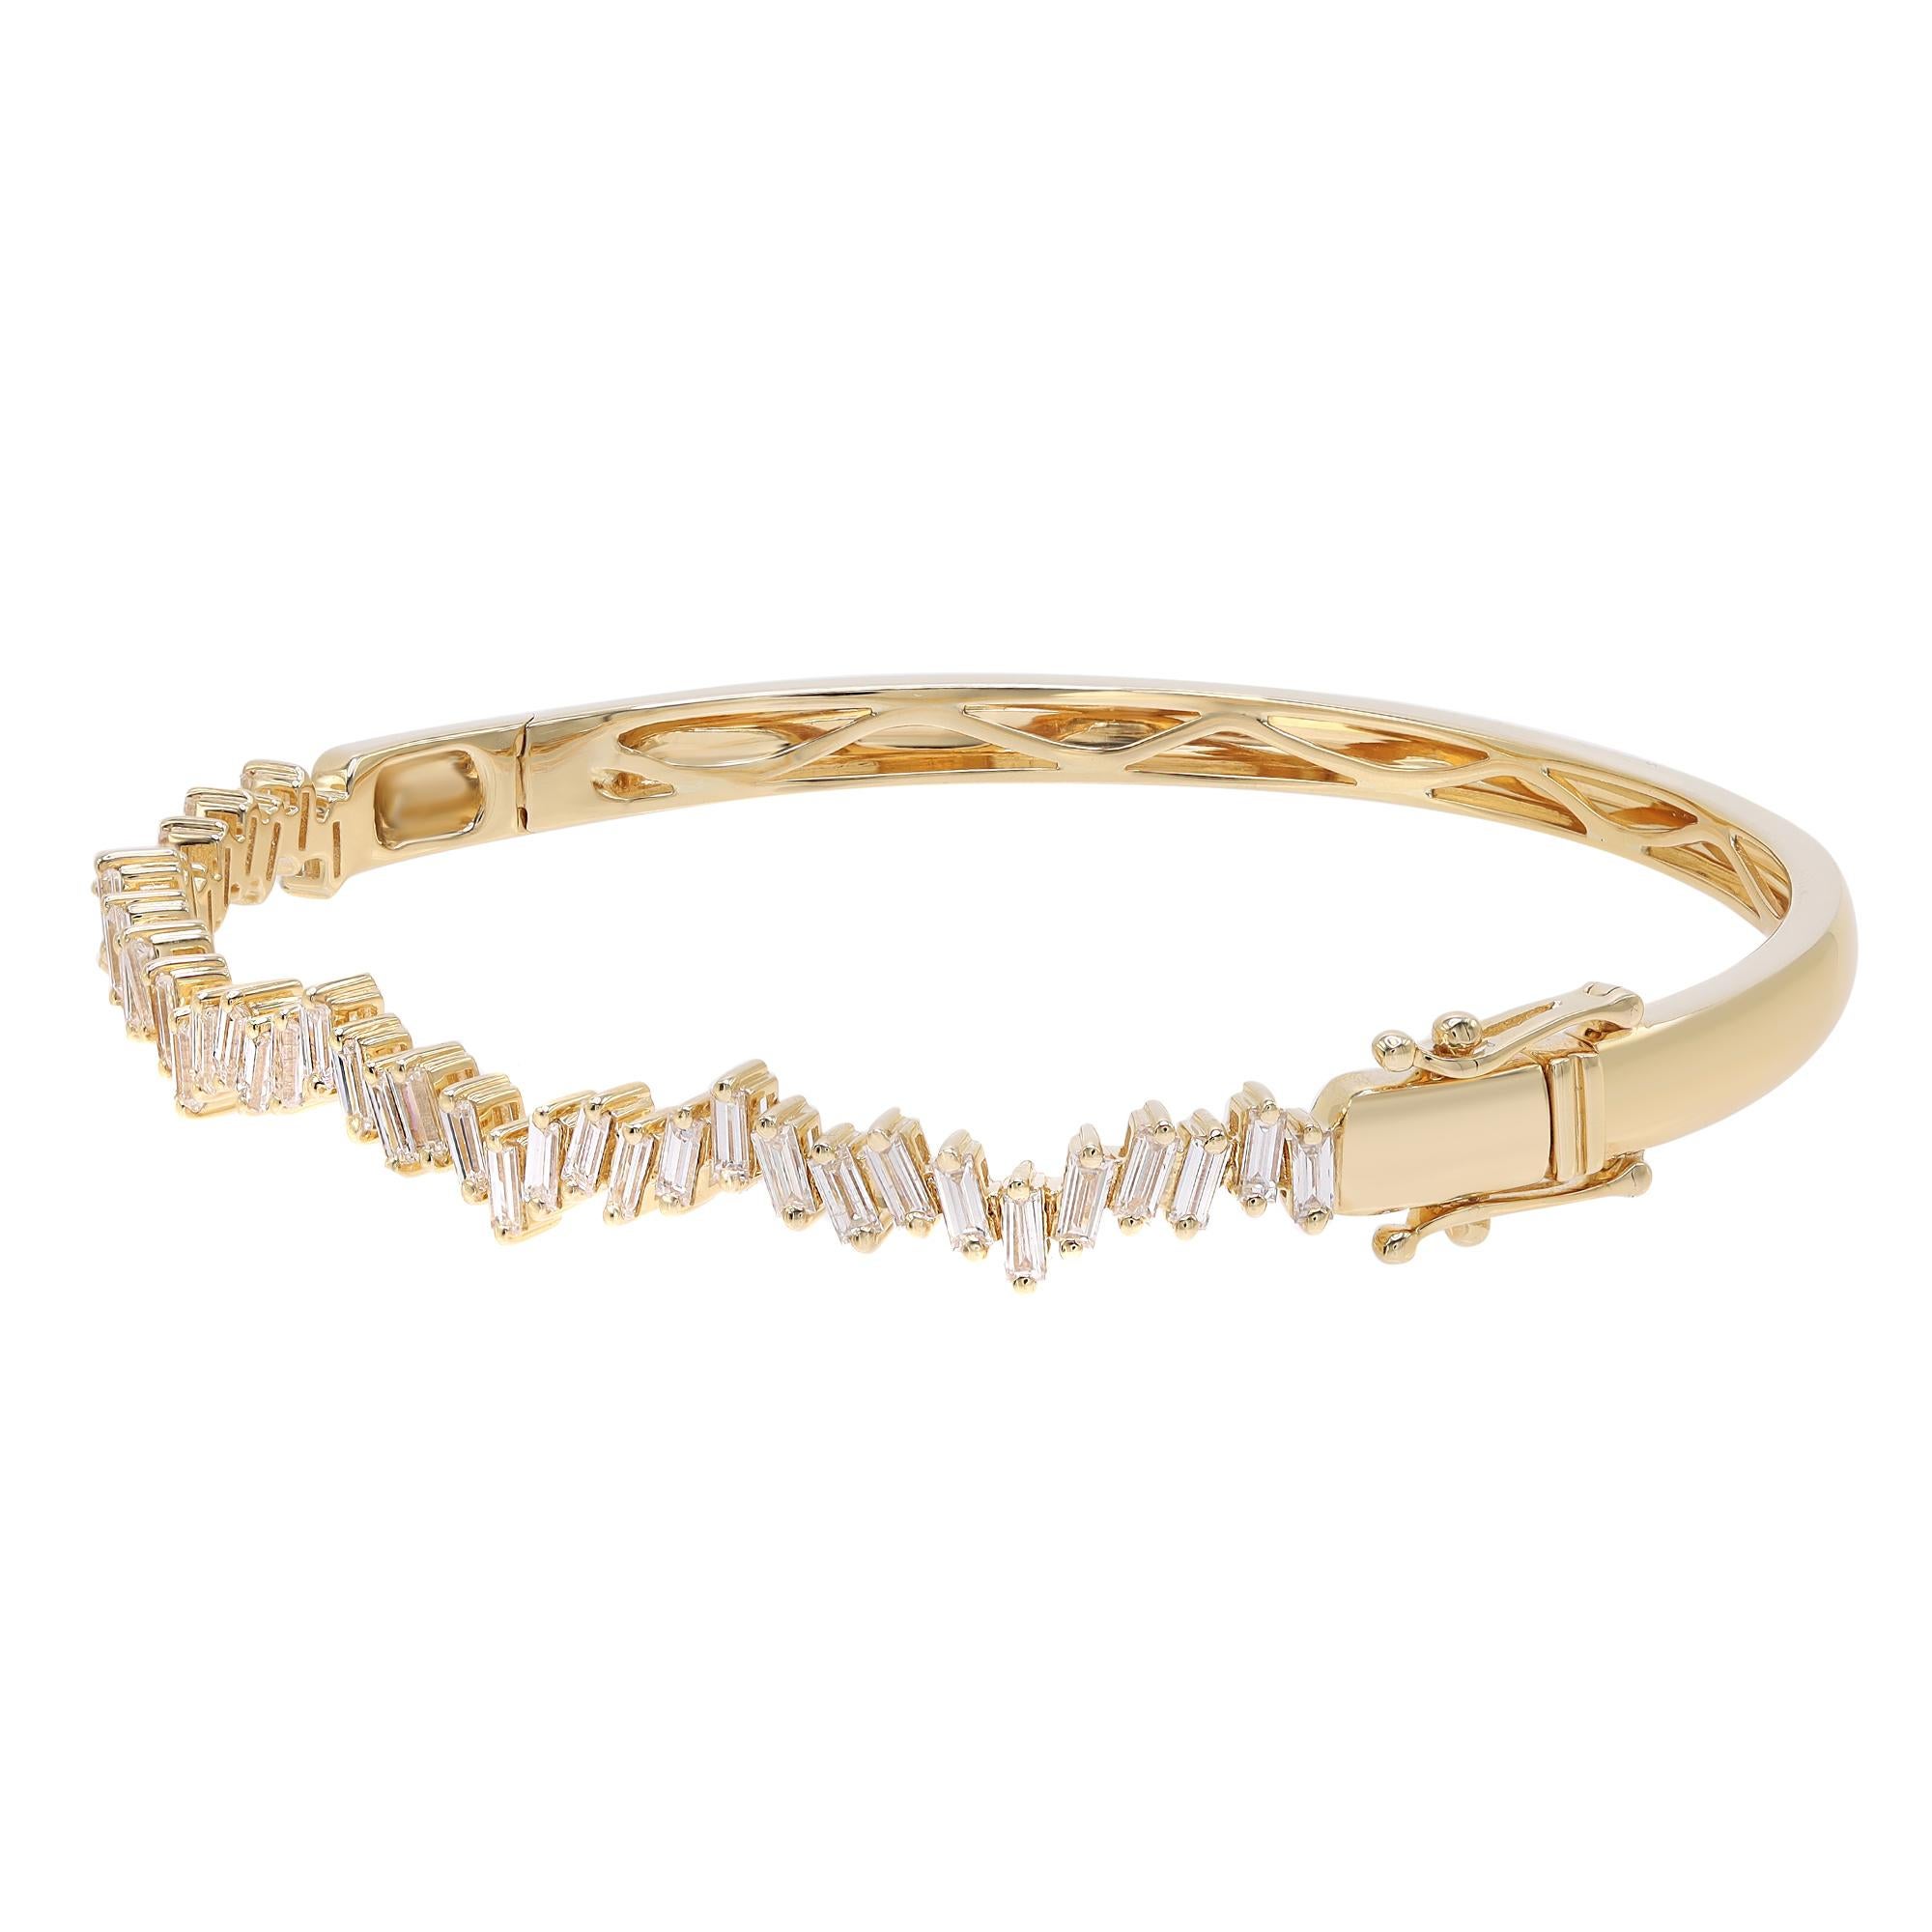 A classic look with easy elegance, this diamond bangle bracelet exudes sophistication. Crafted in 18k yellow gold. This bangle features baguette cut diamonds encrusted halfway through the bangle in a zig-zag pattern in prong setting with a total